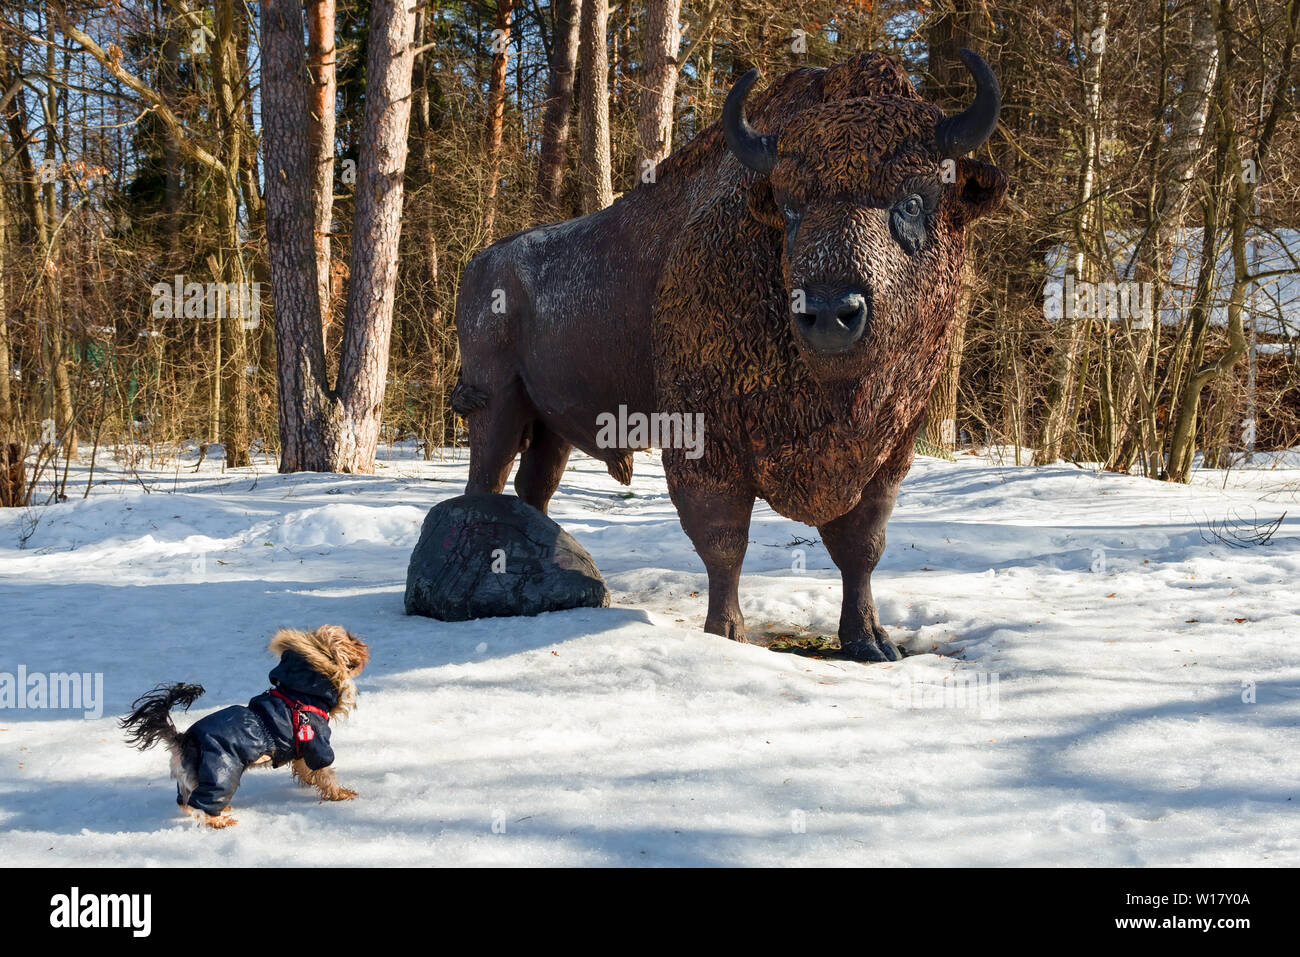 Moscow district, Russia - March 25 2019: Sculpture bison and Yorkshire Terrier puppy in Prioksko-Terassnom reserve in the winter forest. It is an isla Stock Photo